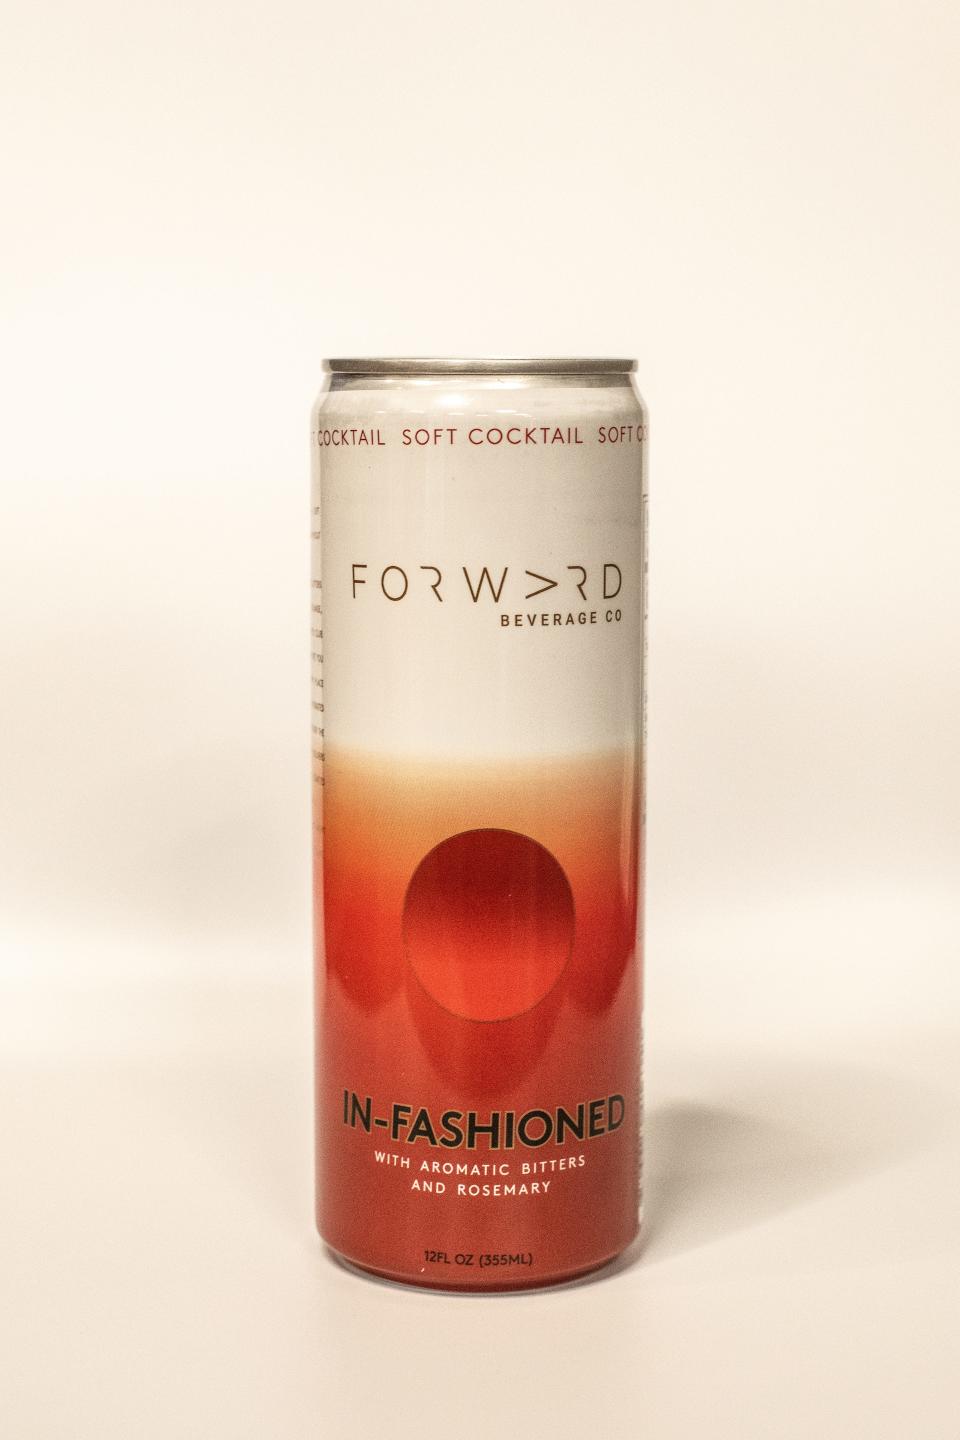 The nonalcoholic In-Fashioned soft cocktail from Wausau's Forward Beverage Co. was inspired by Wisconsin's beloved brandy old fashioned sweet cocktail. The In-Fashioned is one of Forward's bestsellers.